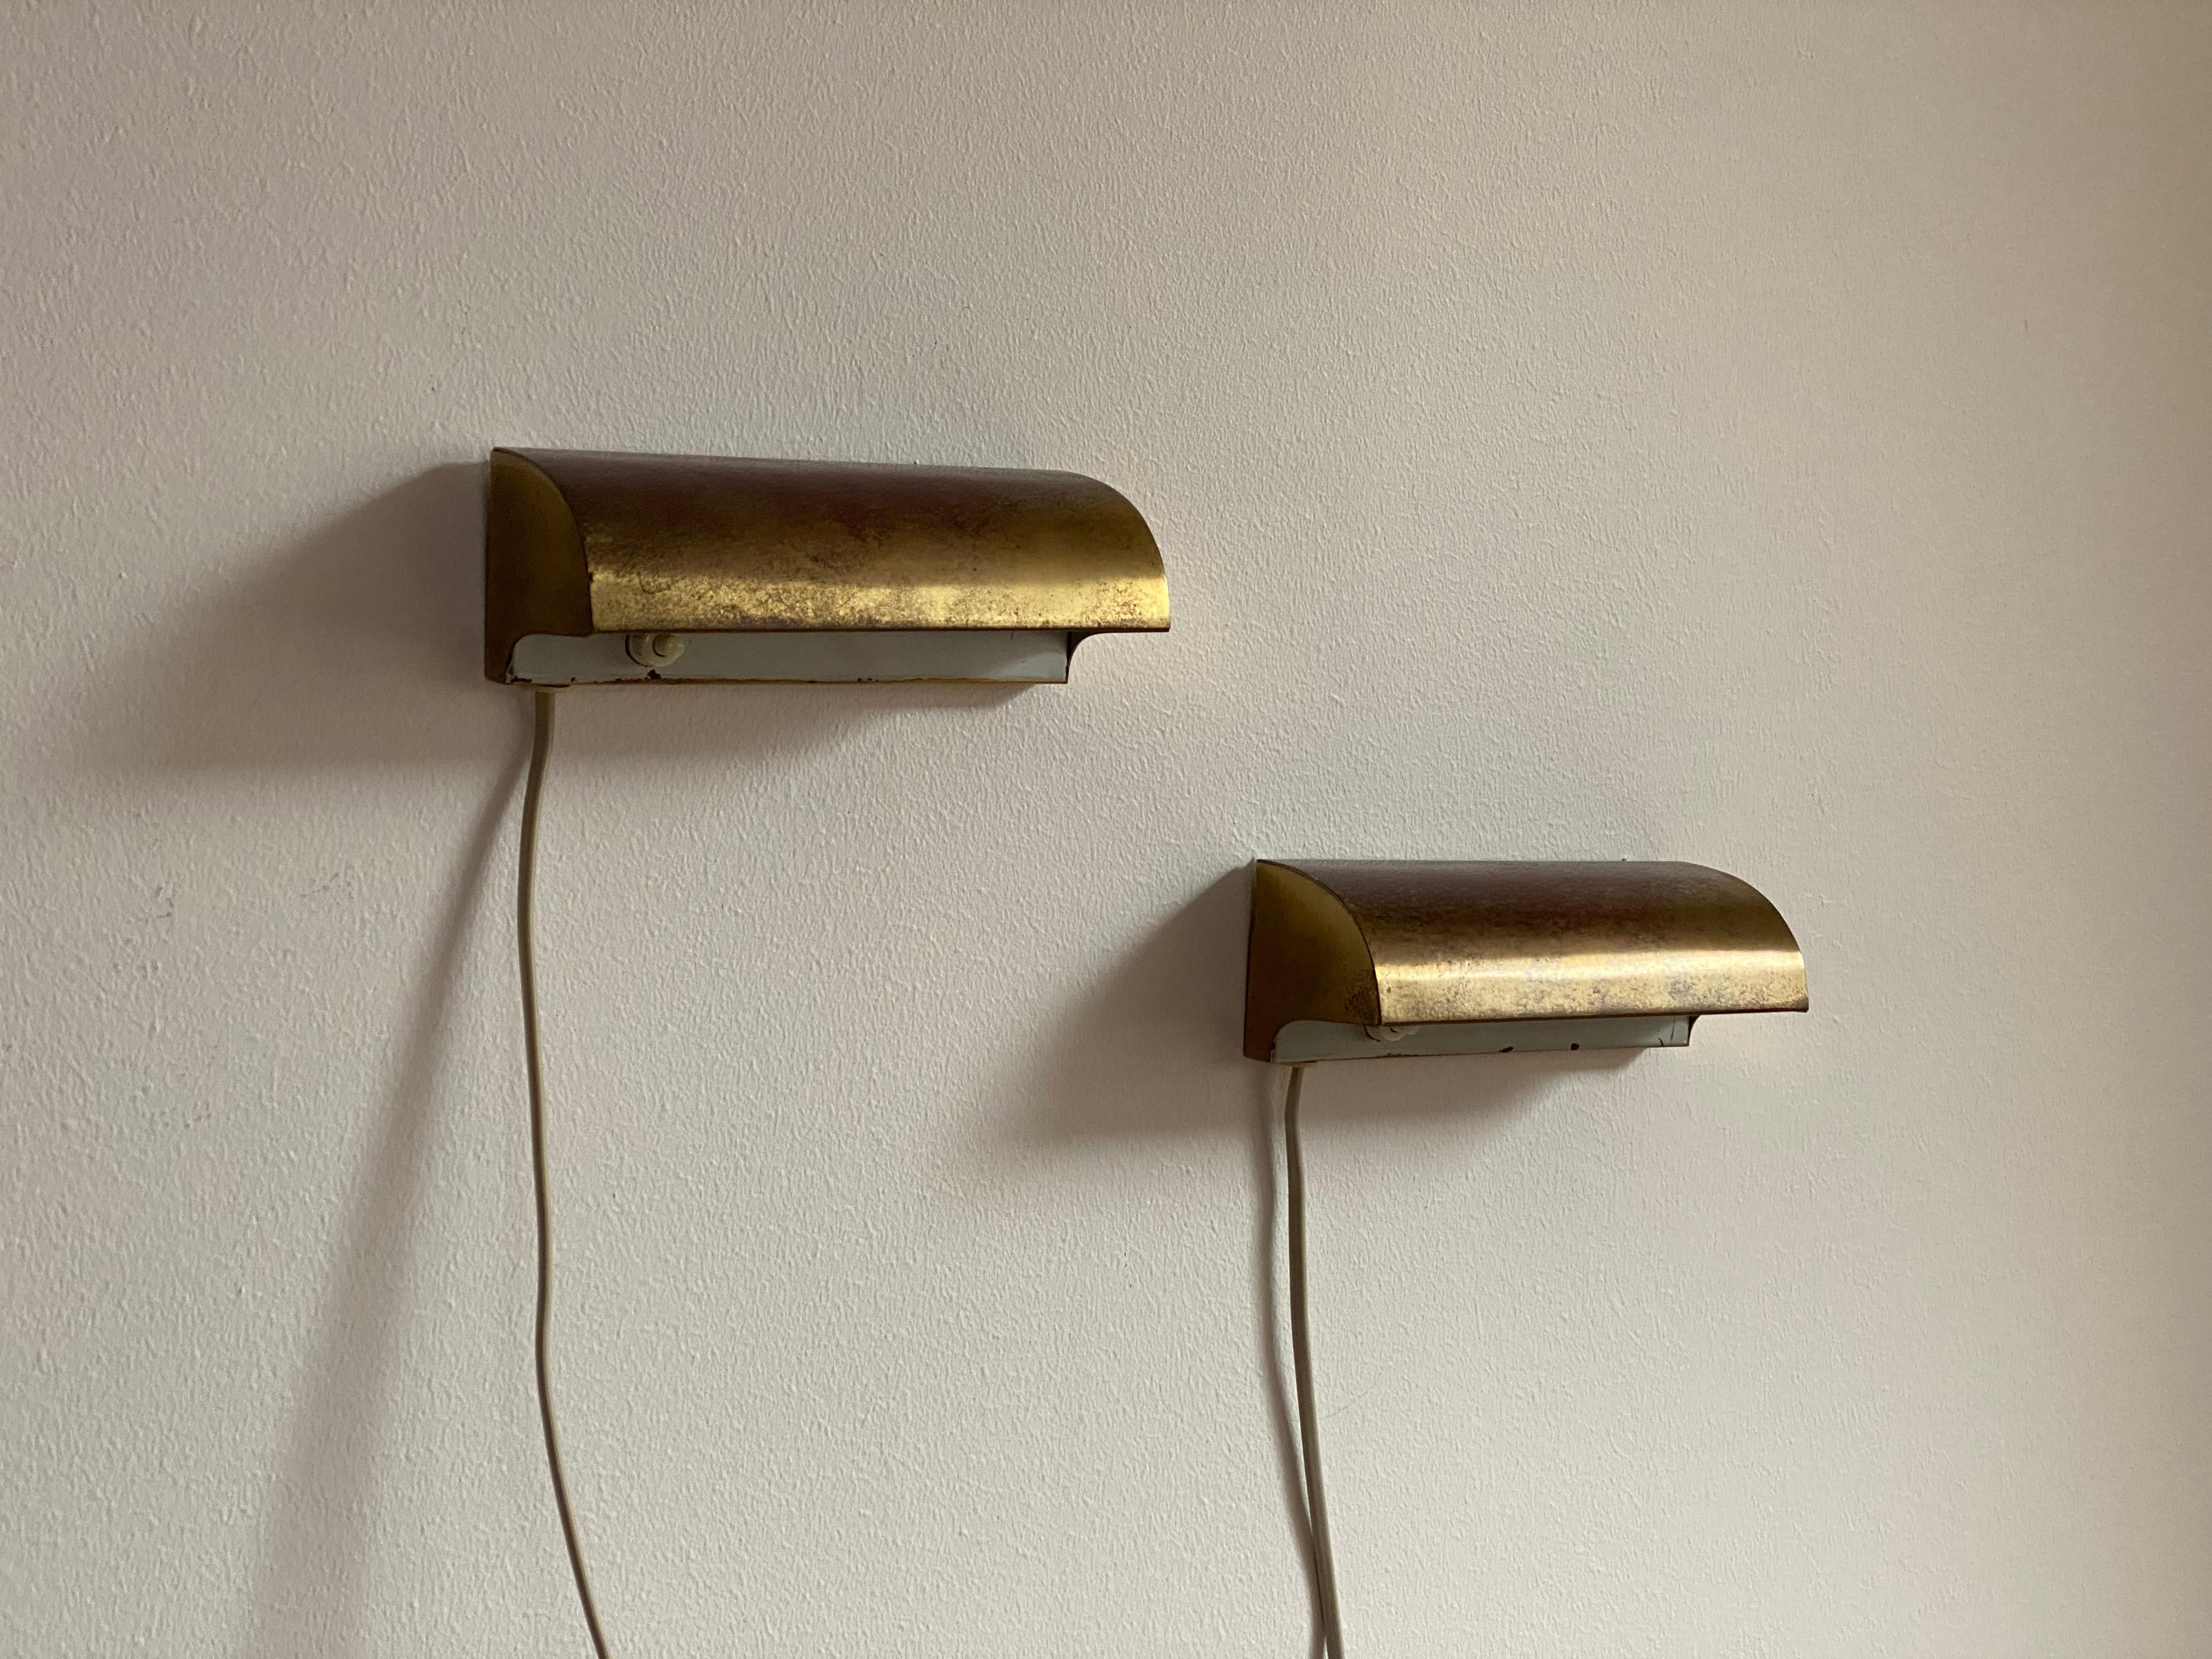 A pair of functionalist / minimalist wall lights / sconces. Designed and produced in Denmark, 1950s. Lacquered inside. 

Other designers of the period include Le Corbusier, Charlotte Perriand, Paavo Tynell, Kaare Klint, and Hans-Agne Jakobsson.